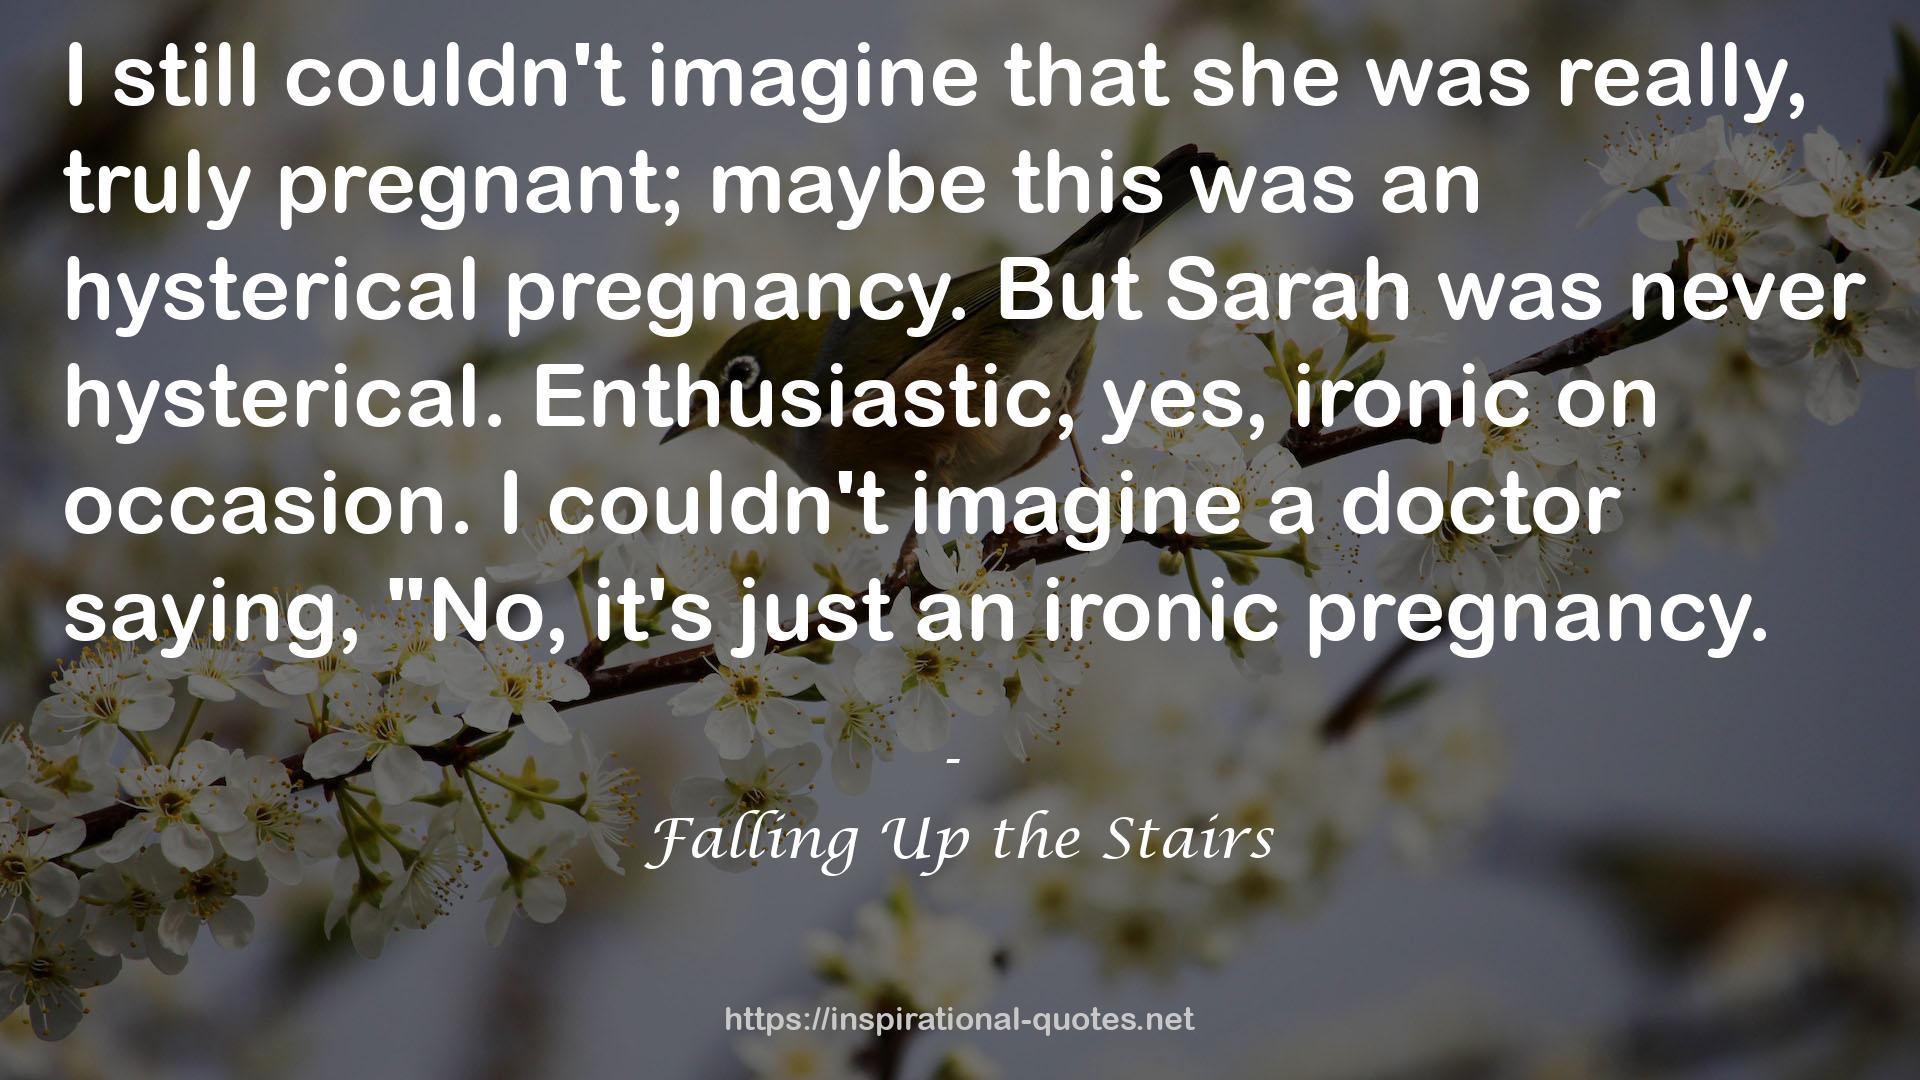 Falling Up the Stairs QUOTES